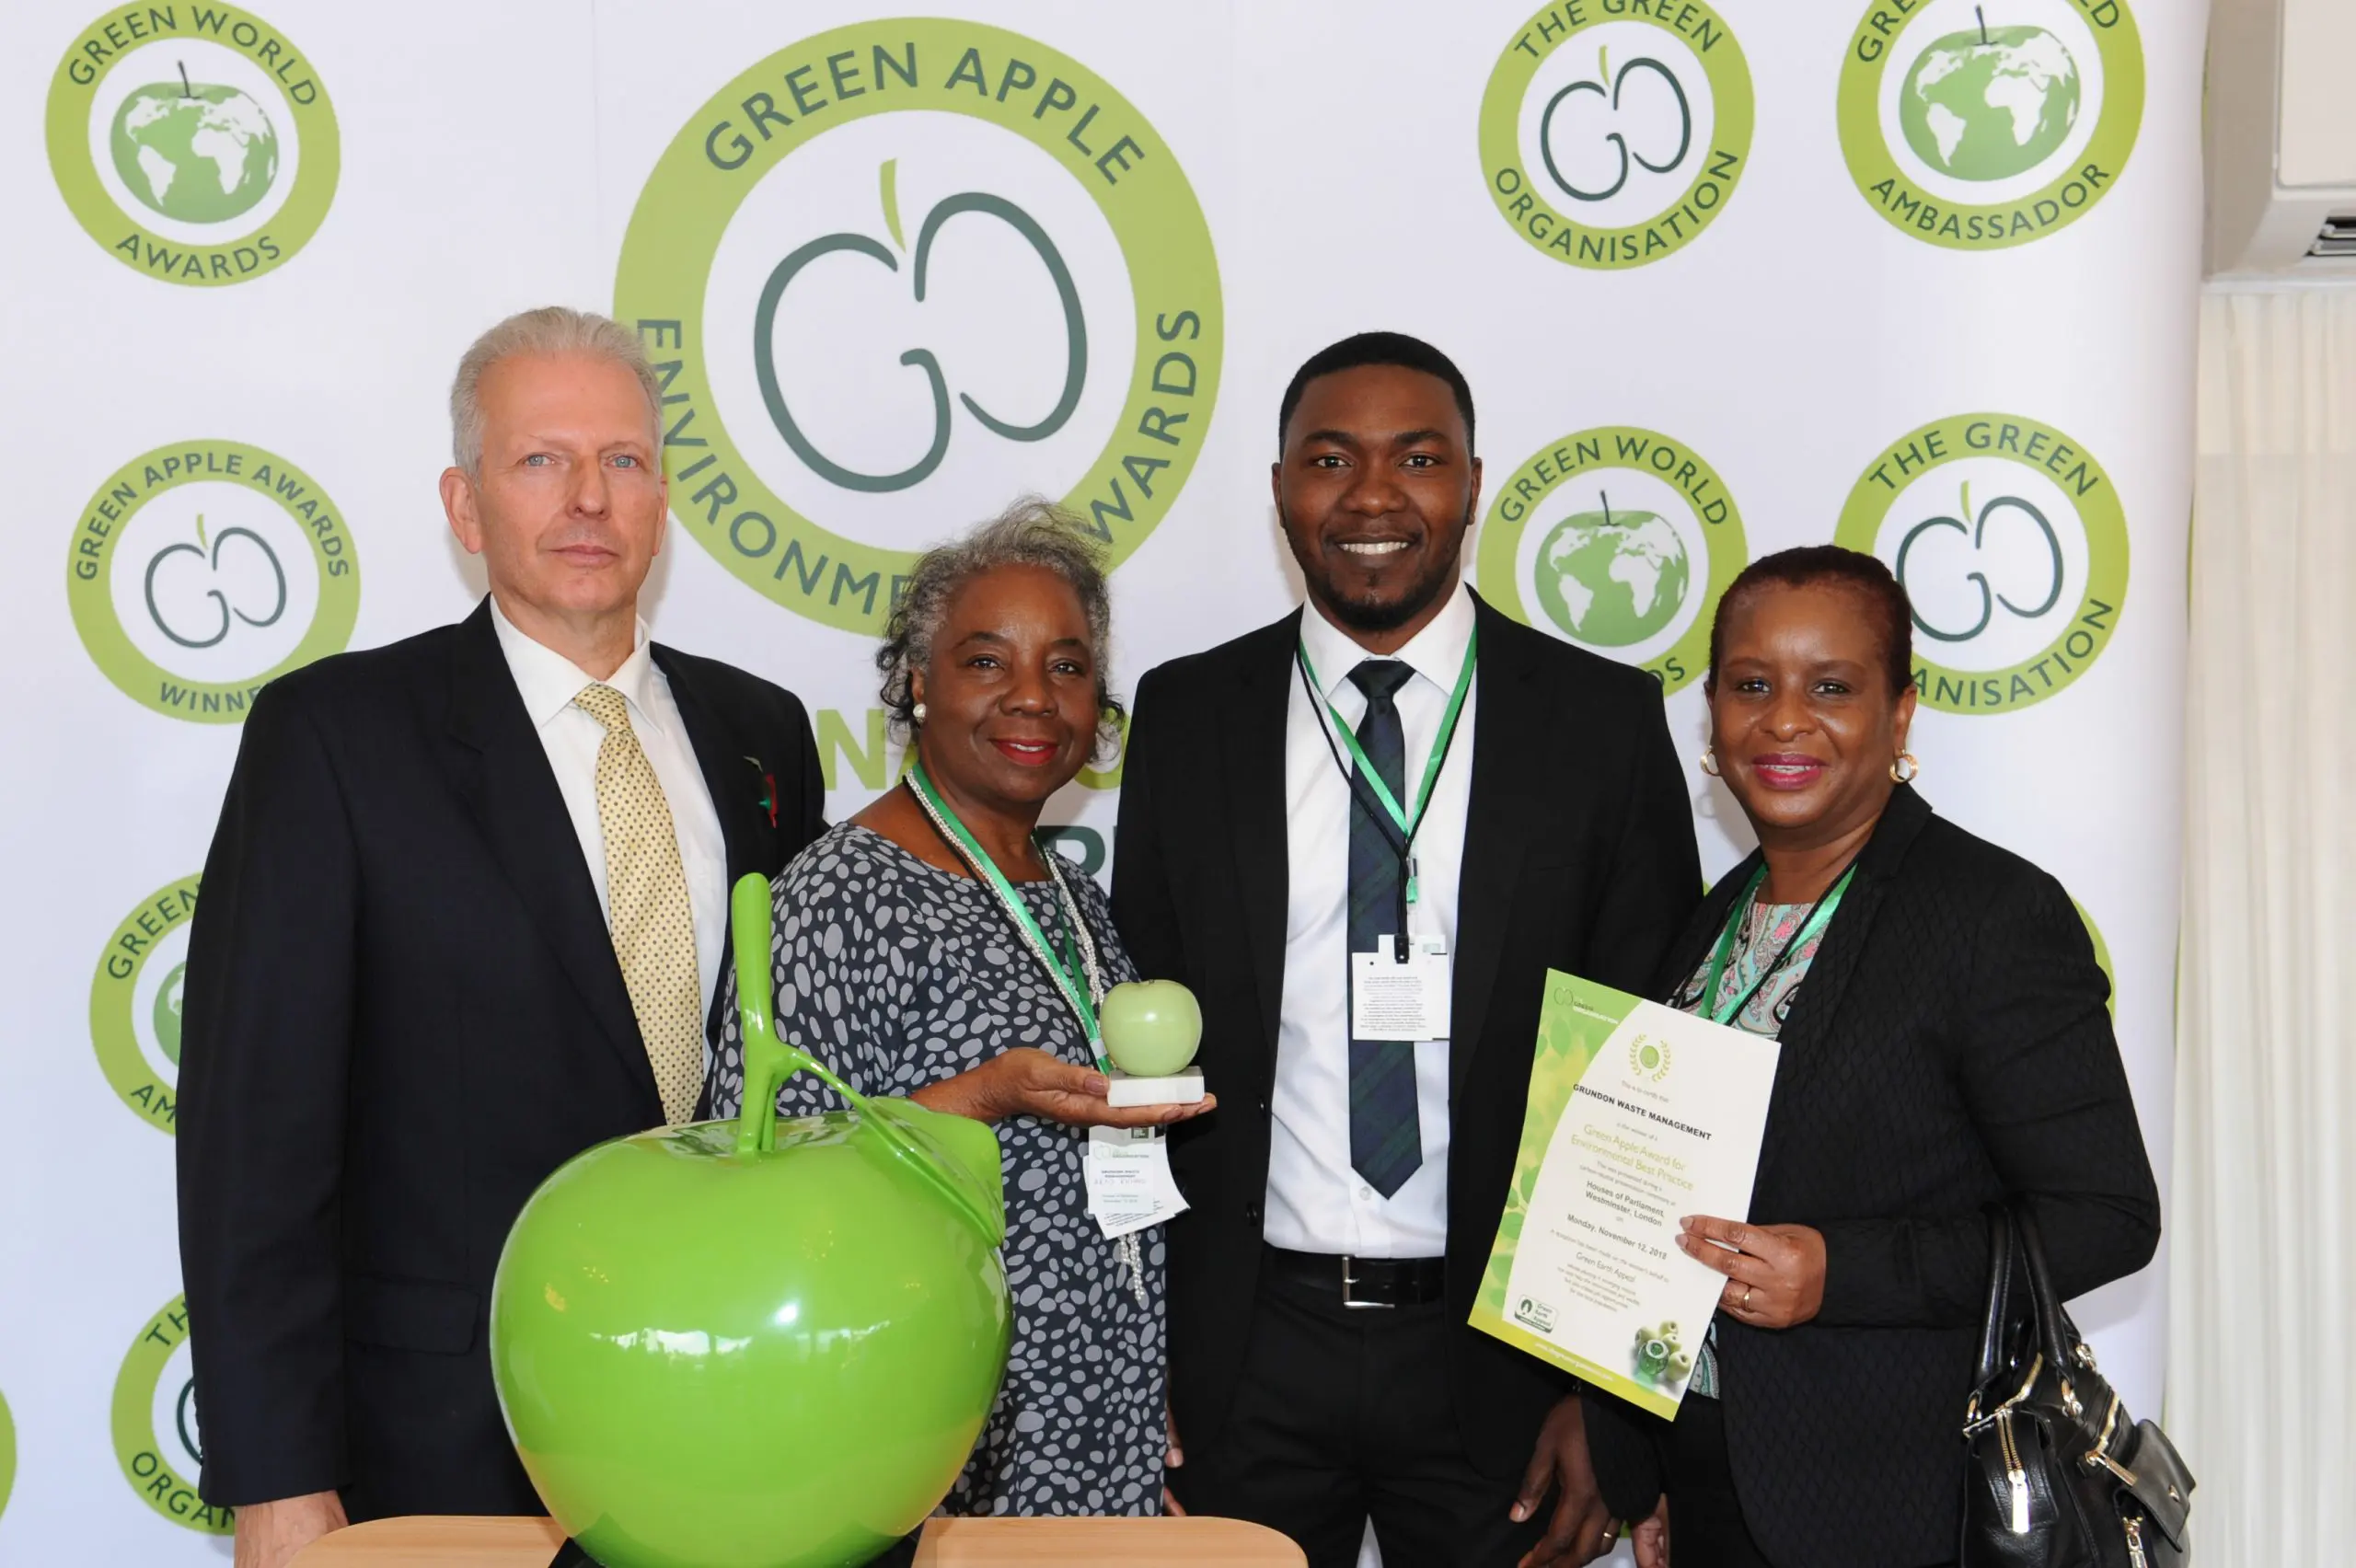 Successful partnership: Grundon's Toye Ogunleye, Waste Manager - NHS Trusts (centre); celebrates with Artis Richard and Brenda Brown from London North West Healthcare NHS Trust after scooping a bronze Green Apple Award in the Health Wastes Management category.